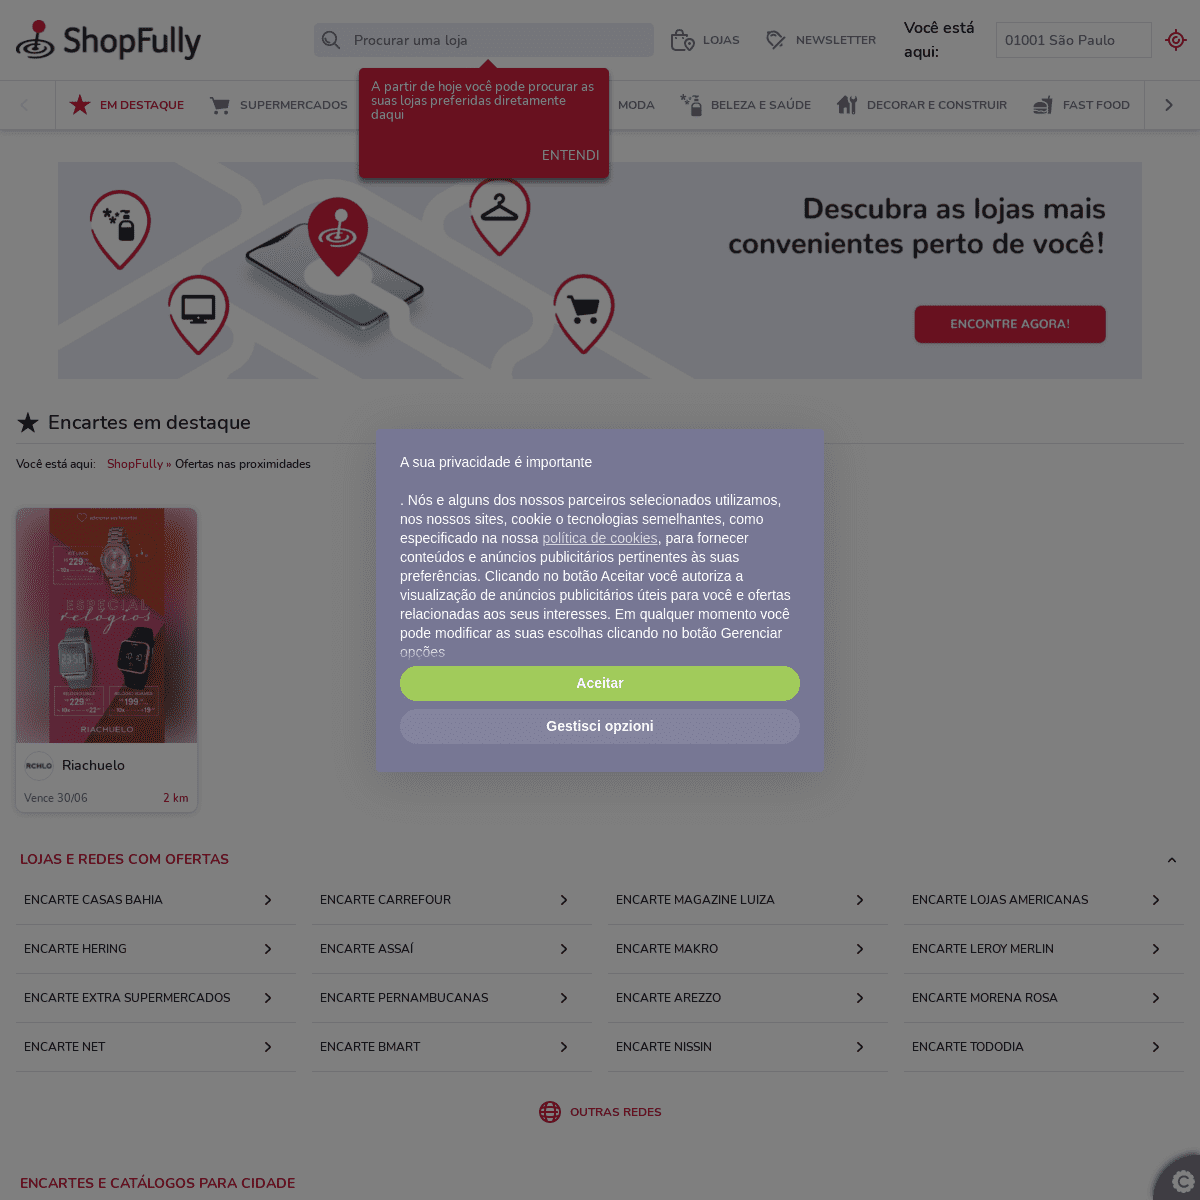 A complete backup of https://shopfully.com.br